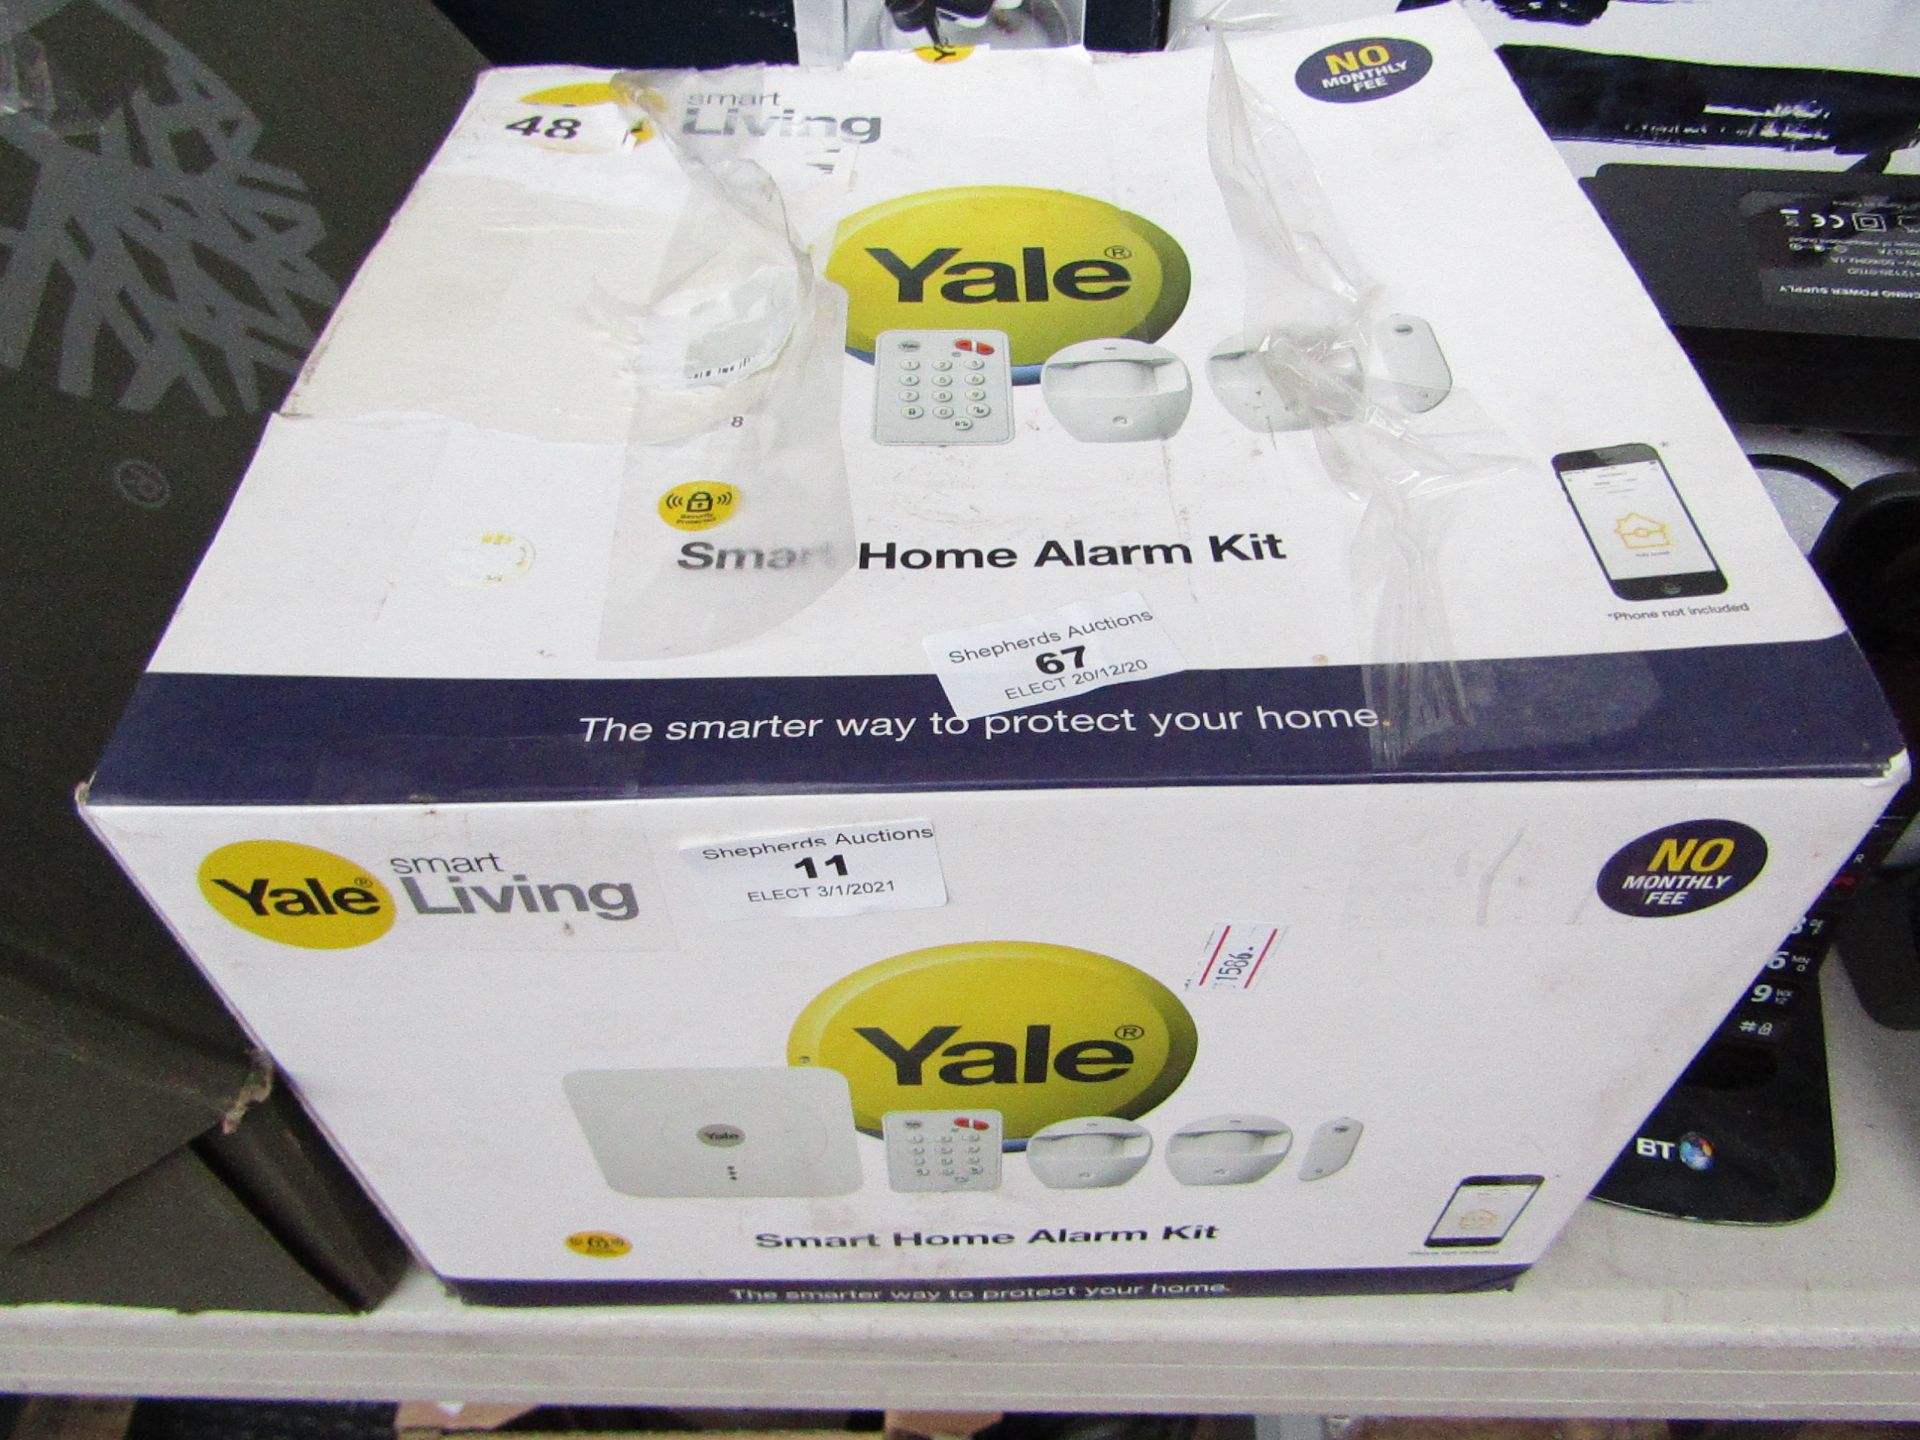 Yale Smart Home alarm kit, unchecked and boxed.